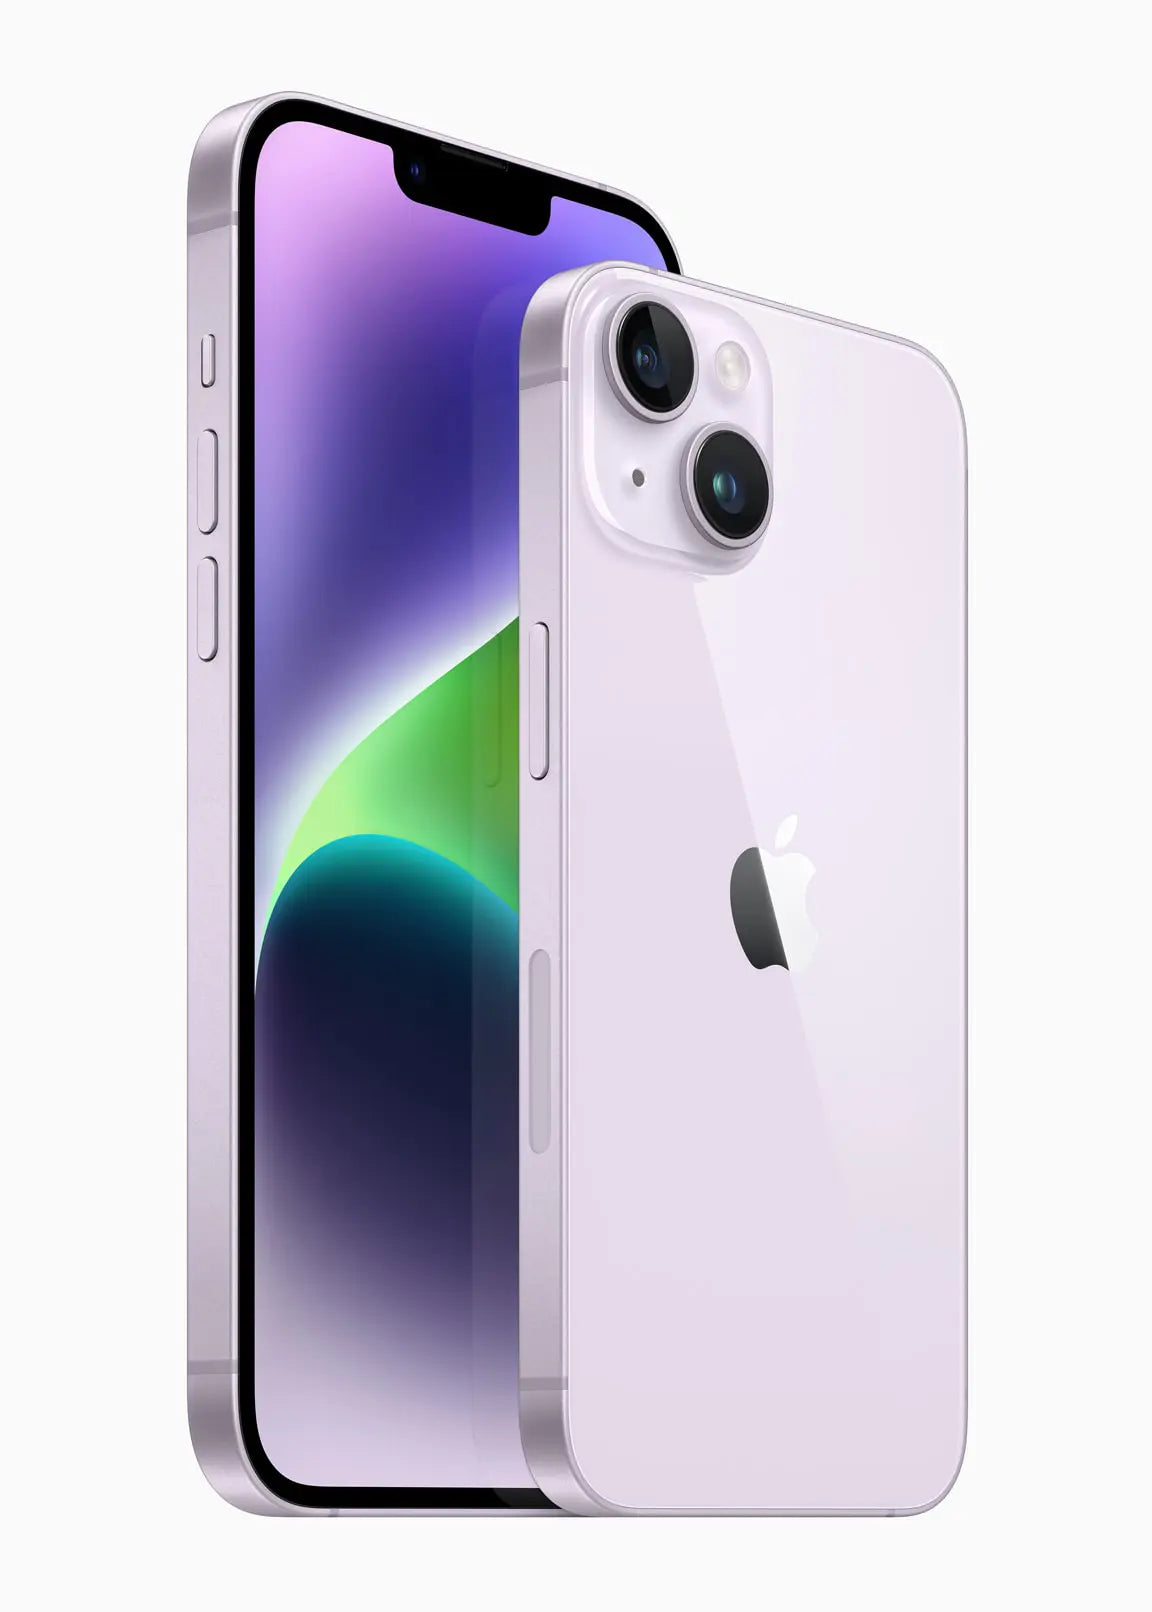 Rent Apple iPhone 14 Pro - 128GB - Dual SIM from $42.90 per month